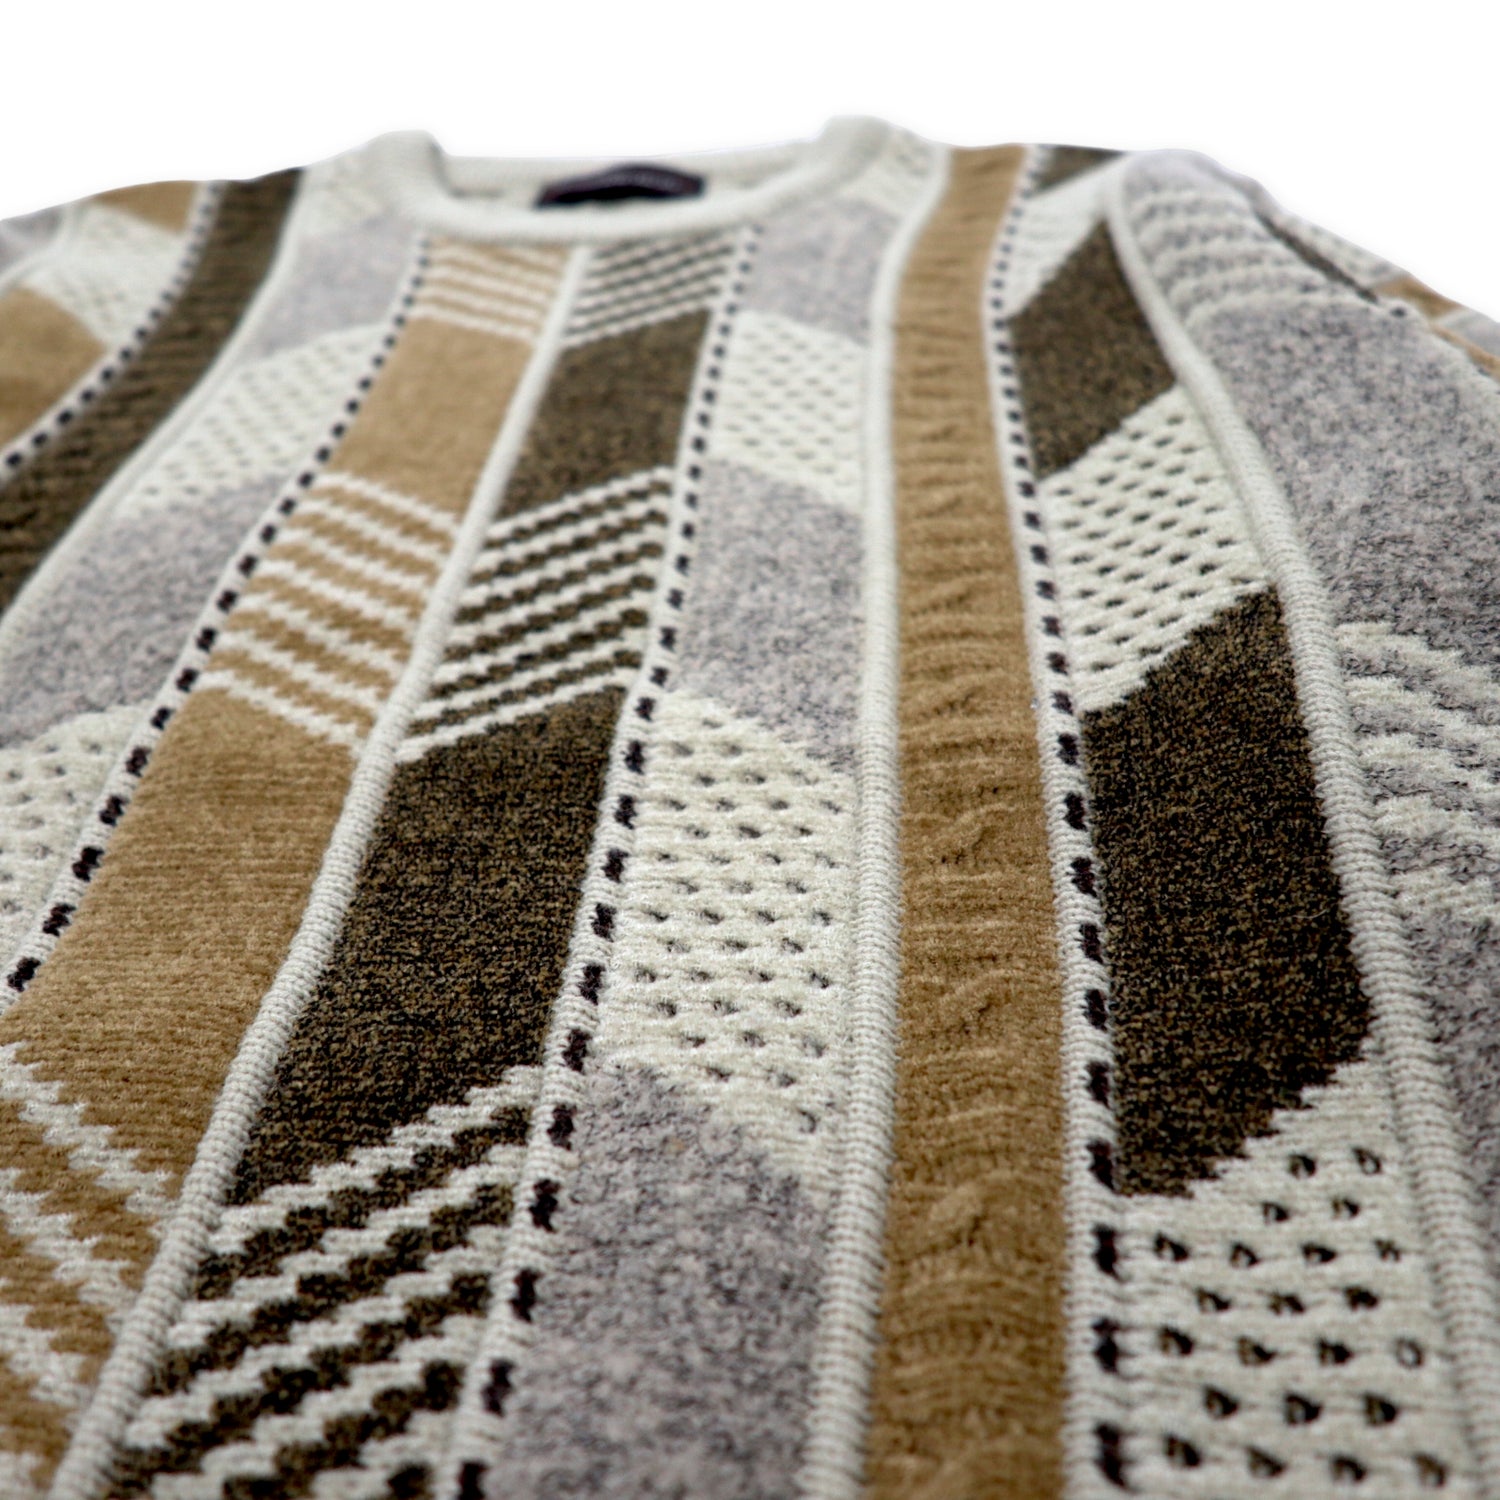 Lindbergh 3D Knit Sweater M Beige Acrylic Patterned Different ...